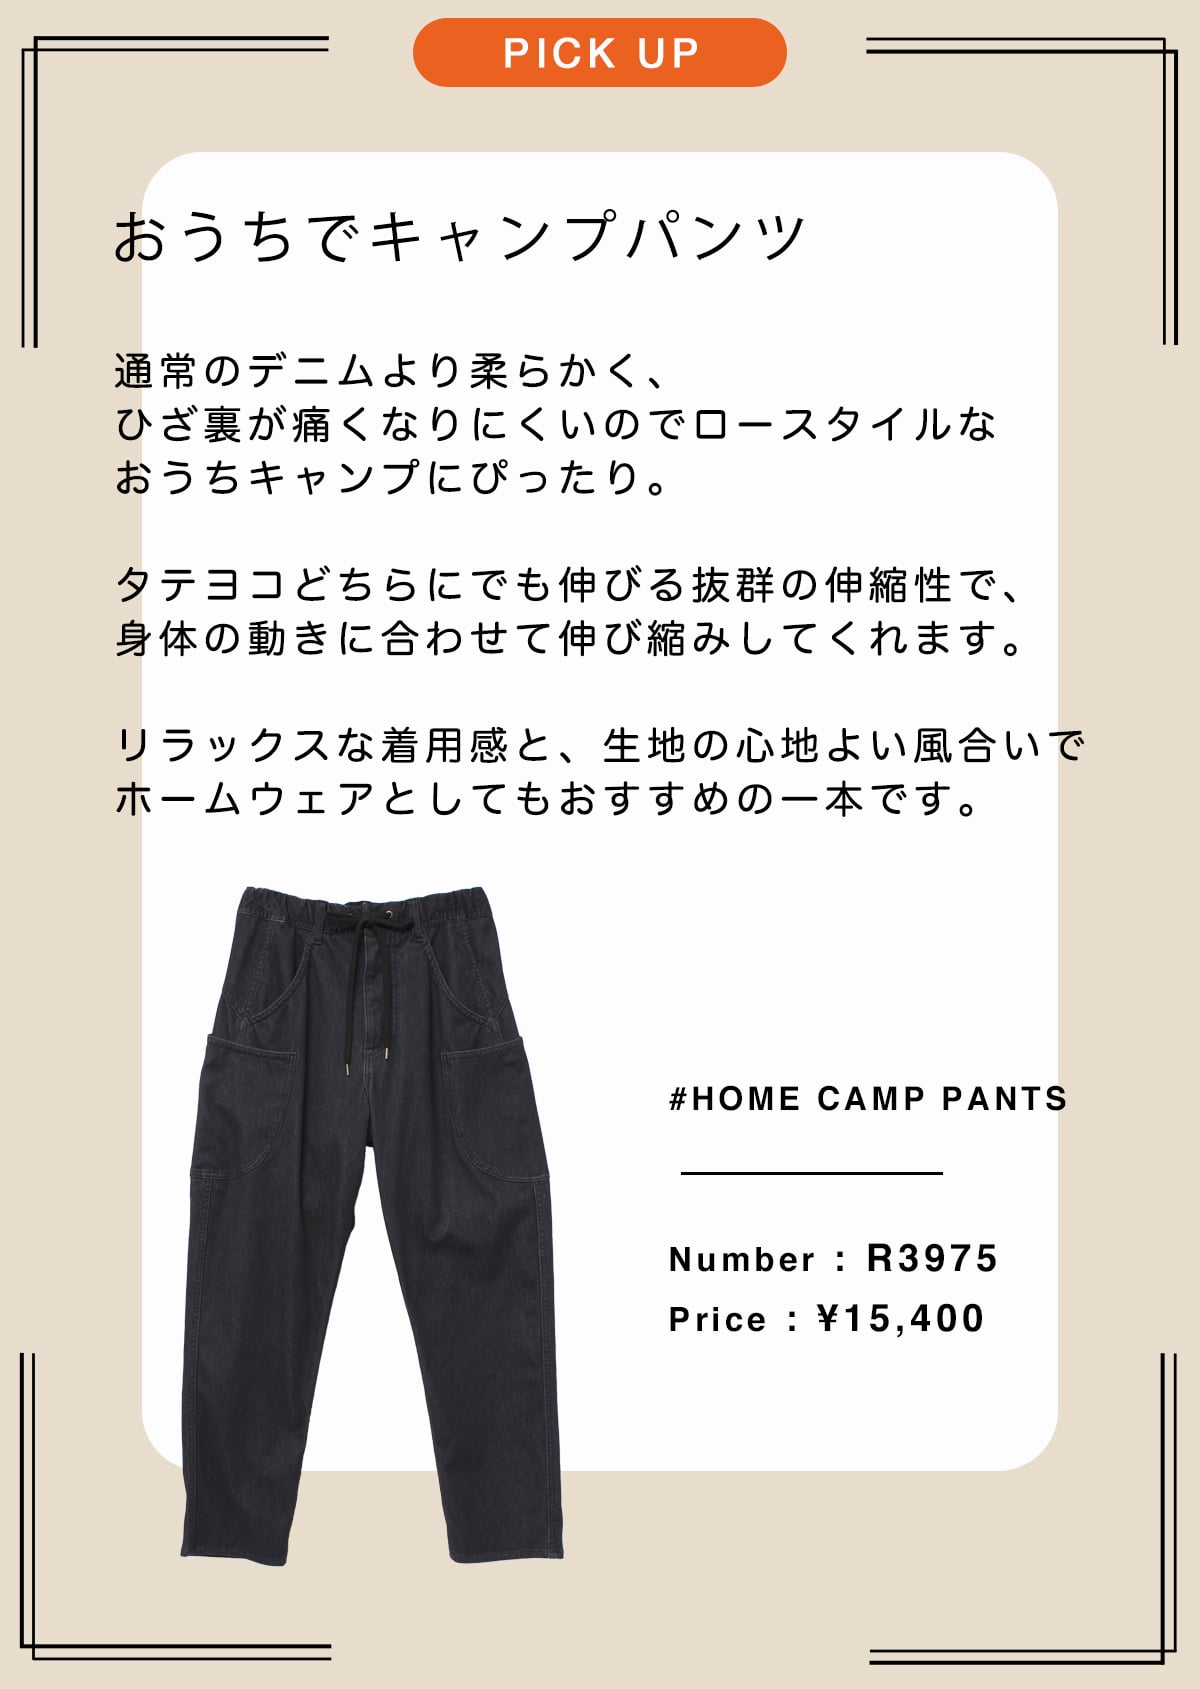 URCH RNA ONOFF RECOMMEND ITEMS - RNA ONLINE STORE | アールエヌエー